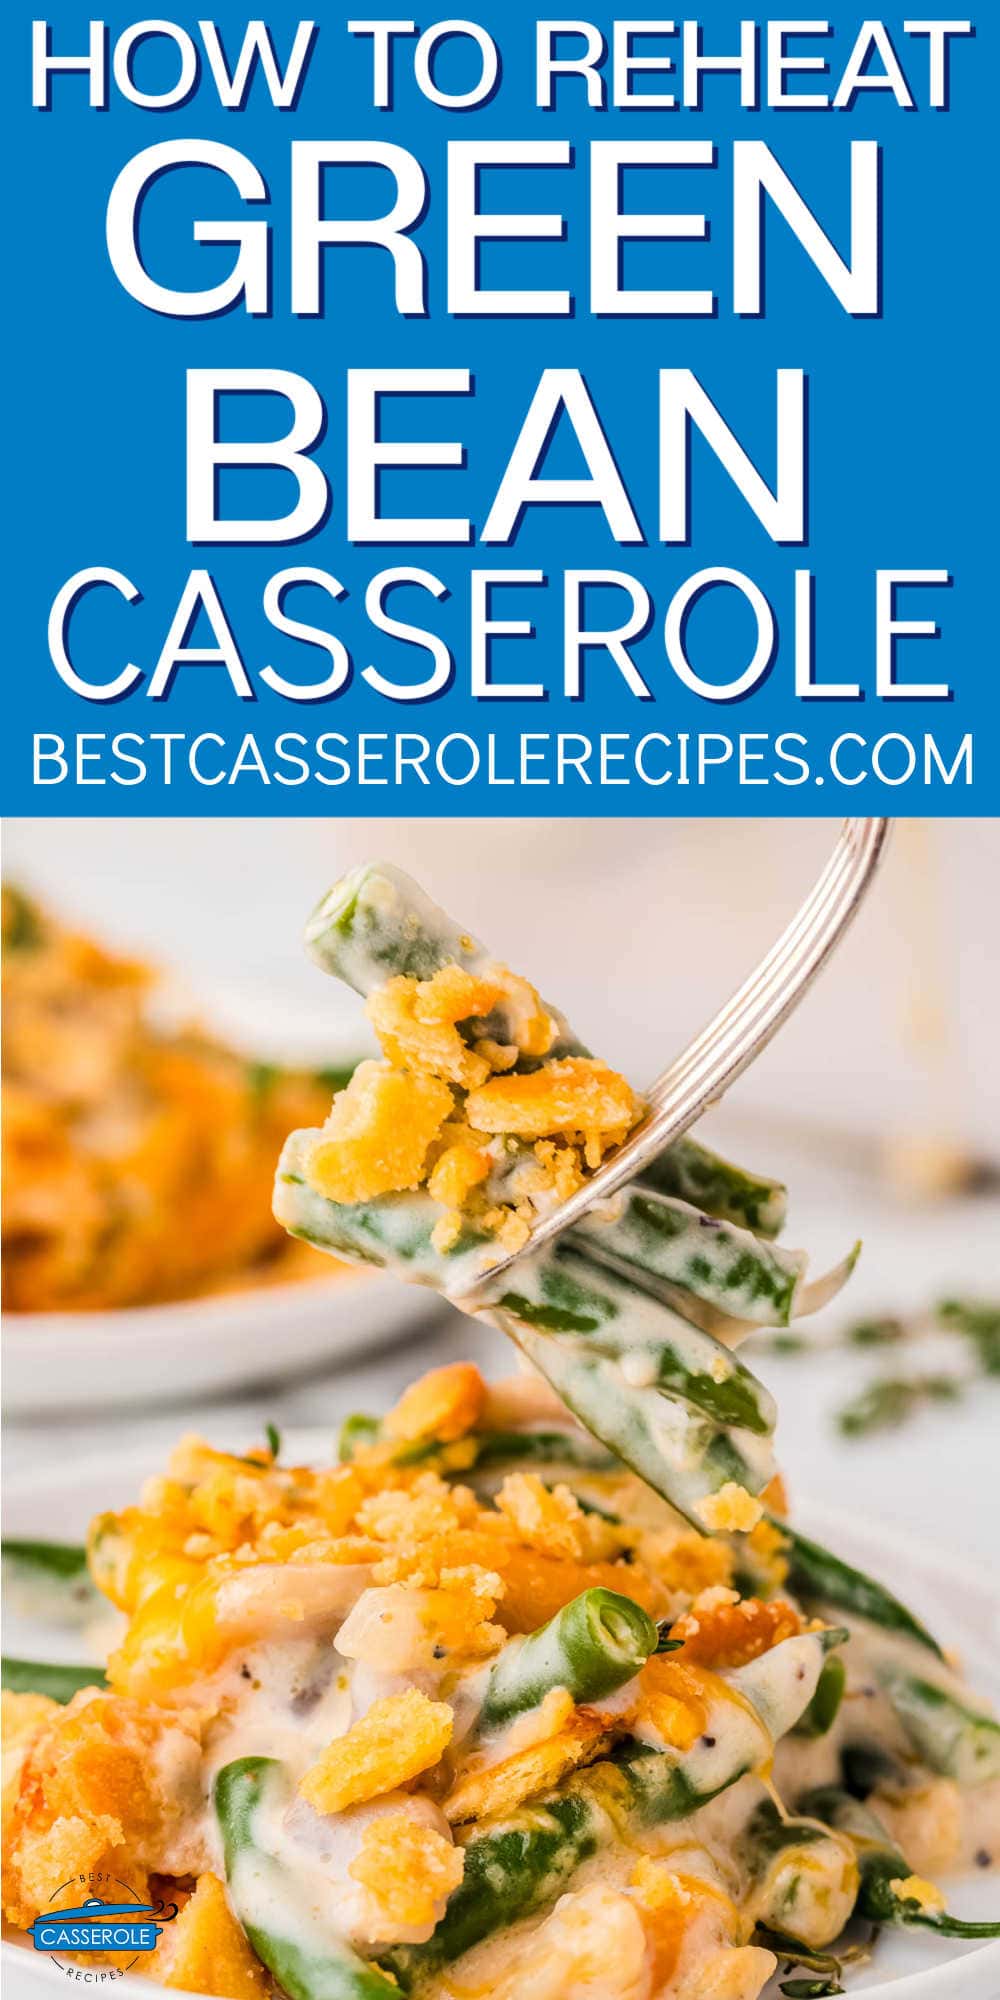 fork of green bean casserole with blue banner and text